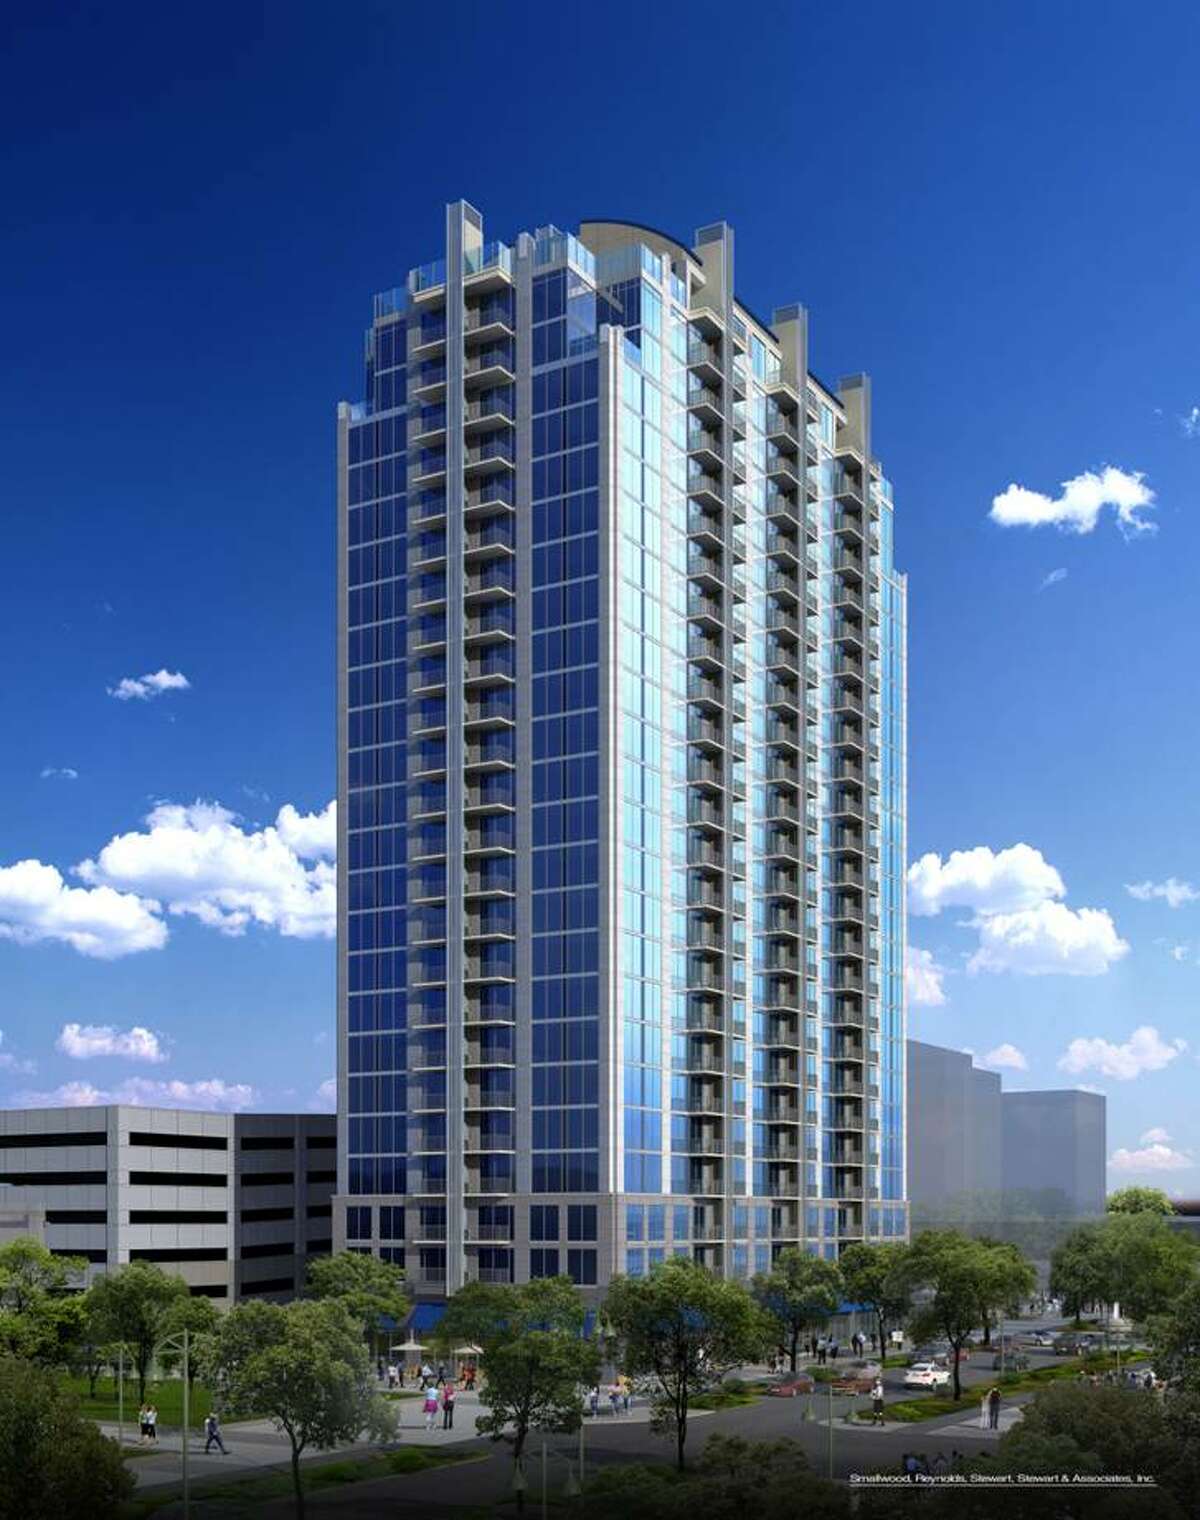 The SkyHouse River Oaks will have 352 units aimed at young professionals.